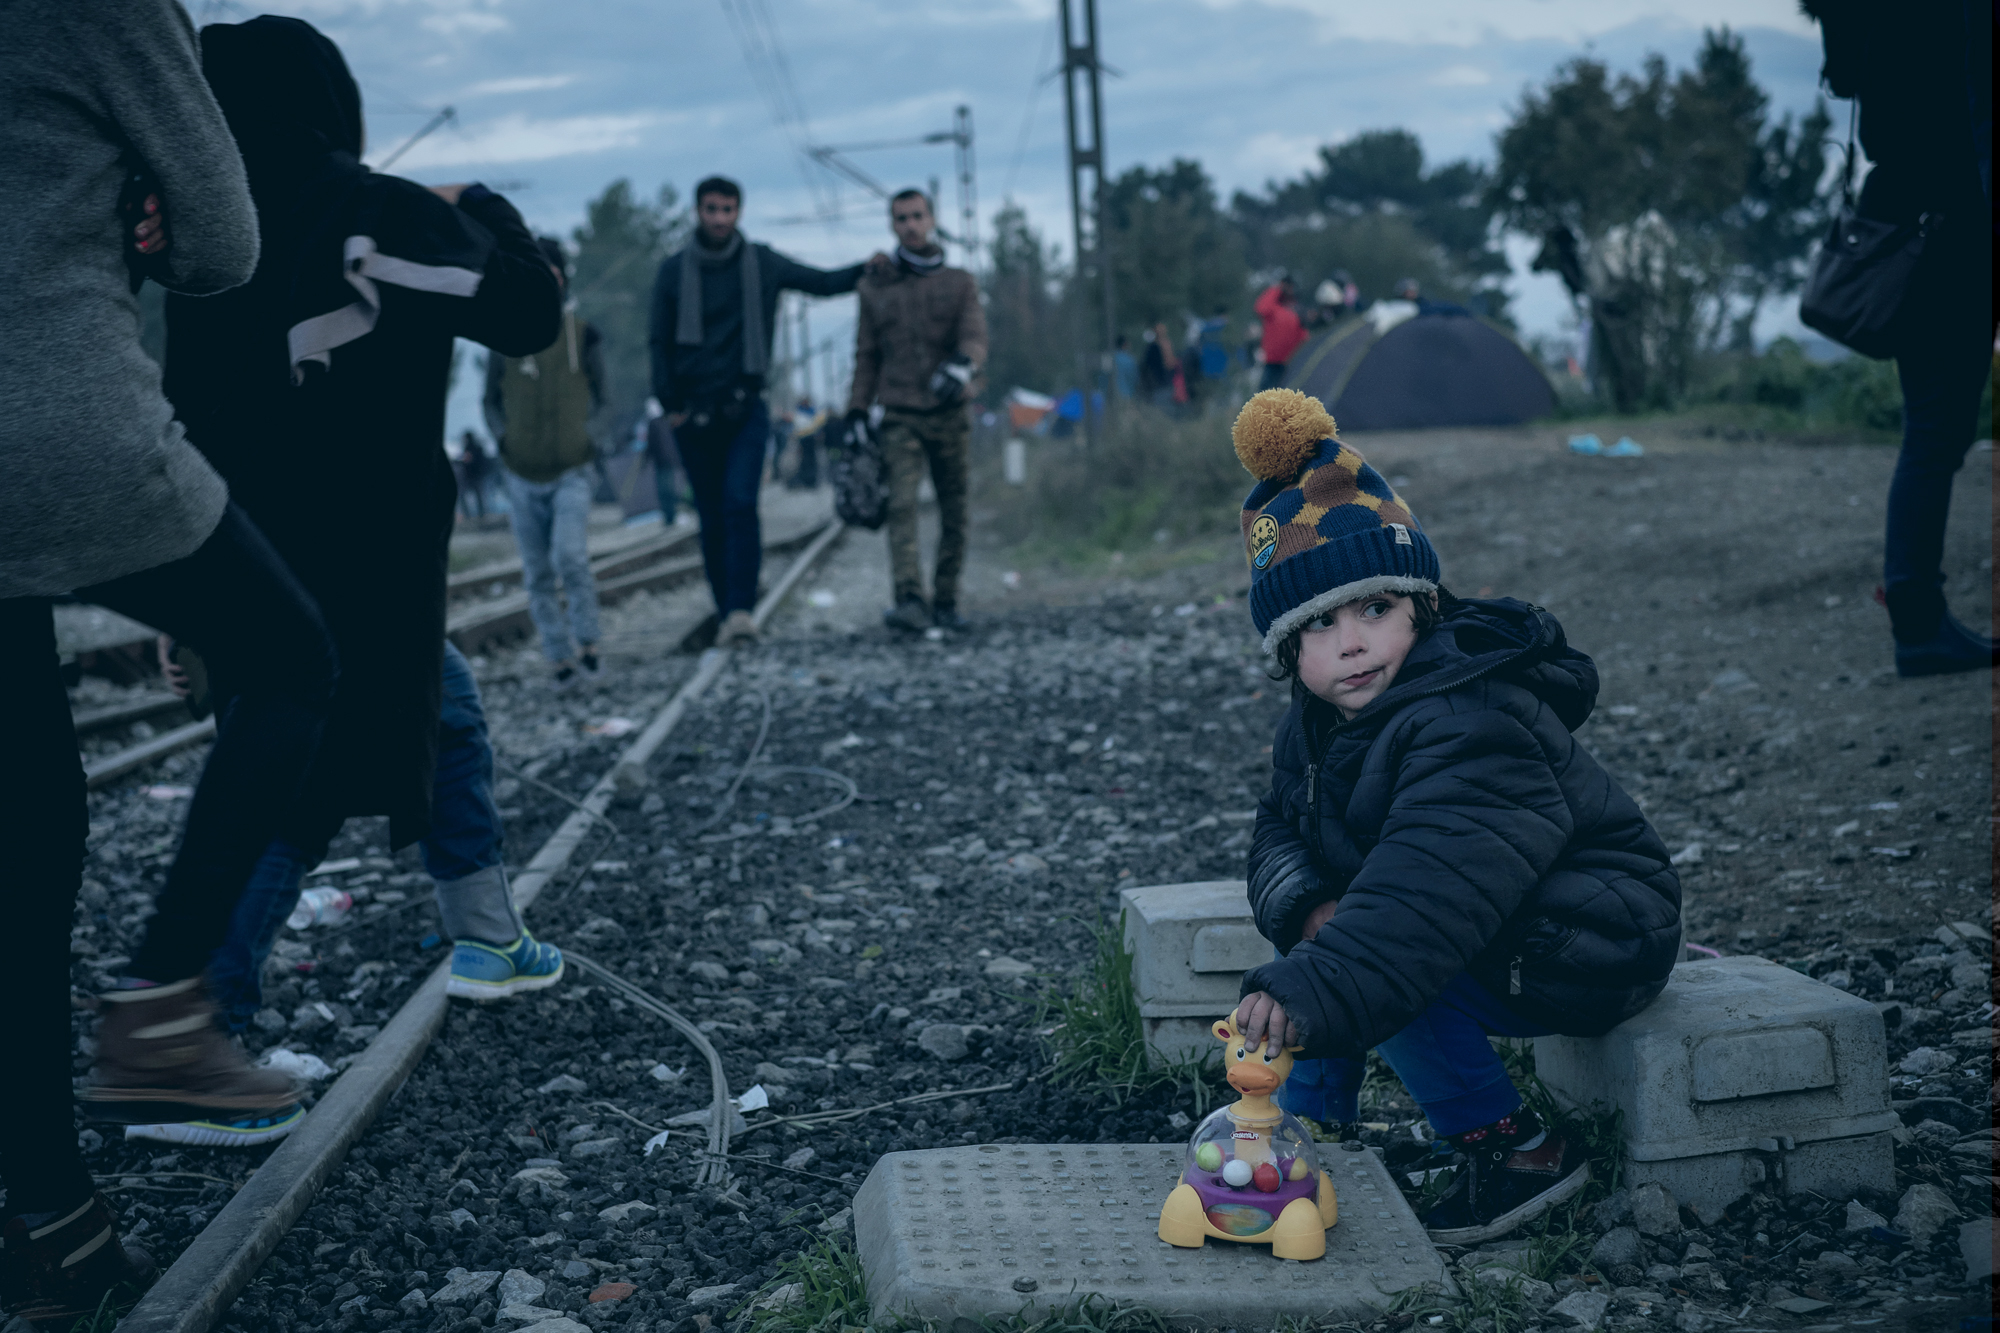 On 26 November, Hussein Marge, 3-and-a-half years old, plays with a toy by railway tracks in a temporary camp near town of Idomeni, close to the border with the former Yugoslav Republic of Macedonia. Hussein and his family, who are from Lebanon’s capital Beirut, are hoping to cross into the former Yugoslav Republic of Macedonia – where the Government has begun restricting the flow of refugees and migrants on the move, and is allowing only Syrians, Iraqis and Afghans to continue their journey. About 1,300 refugees protested the Government’s decision to deny entry to people not from those three countries. Refugees and migrants flows into Europe are at an unprecedented high. By end November, over 870,000 refugees and migrants had arrived by sea in Europe since the beginning of the year. More than one in five refugees and migrants reaching Europe is a child, and children make up an estimated one-quarter of the 730,000 sea arrivals in Greece and of flows heading towards Western and Northern Europe through the former Yugoslav Republic of Macedonia, Serbia, Croatia and Slovenia so far this year. The main nationalities of refugees and migrants include Syrians, Afghans and Iraqis. Recent restrictions imposed by governments at several border crossings in the Balkans is creating additional hardships and challenges for refugee and migrants, including leaving some stranded at various crossing points, creating tensions and protests at border crossings, or forcing others to take further risks by taking dangerous smuggling routes to reach safety. UNICEF, together with partners UNHCR and IOM, is supporting child-friendly spaces in reception centres at border crossings along the Balkan routes, mobilizing for winter and working with governments to strengthen child protection systems for all children, including refugee and migrant children. UNICEF is also monitoring and providing assistance with partners at these points, and is providing blankets, winter clothing and other key items to meet basic needs. Unicef/2015/Gilbertson VII